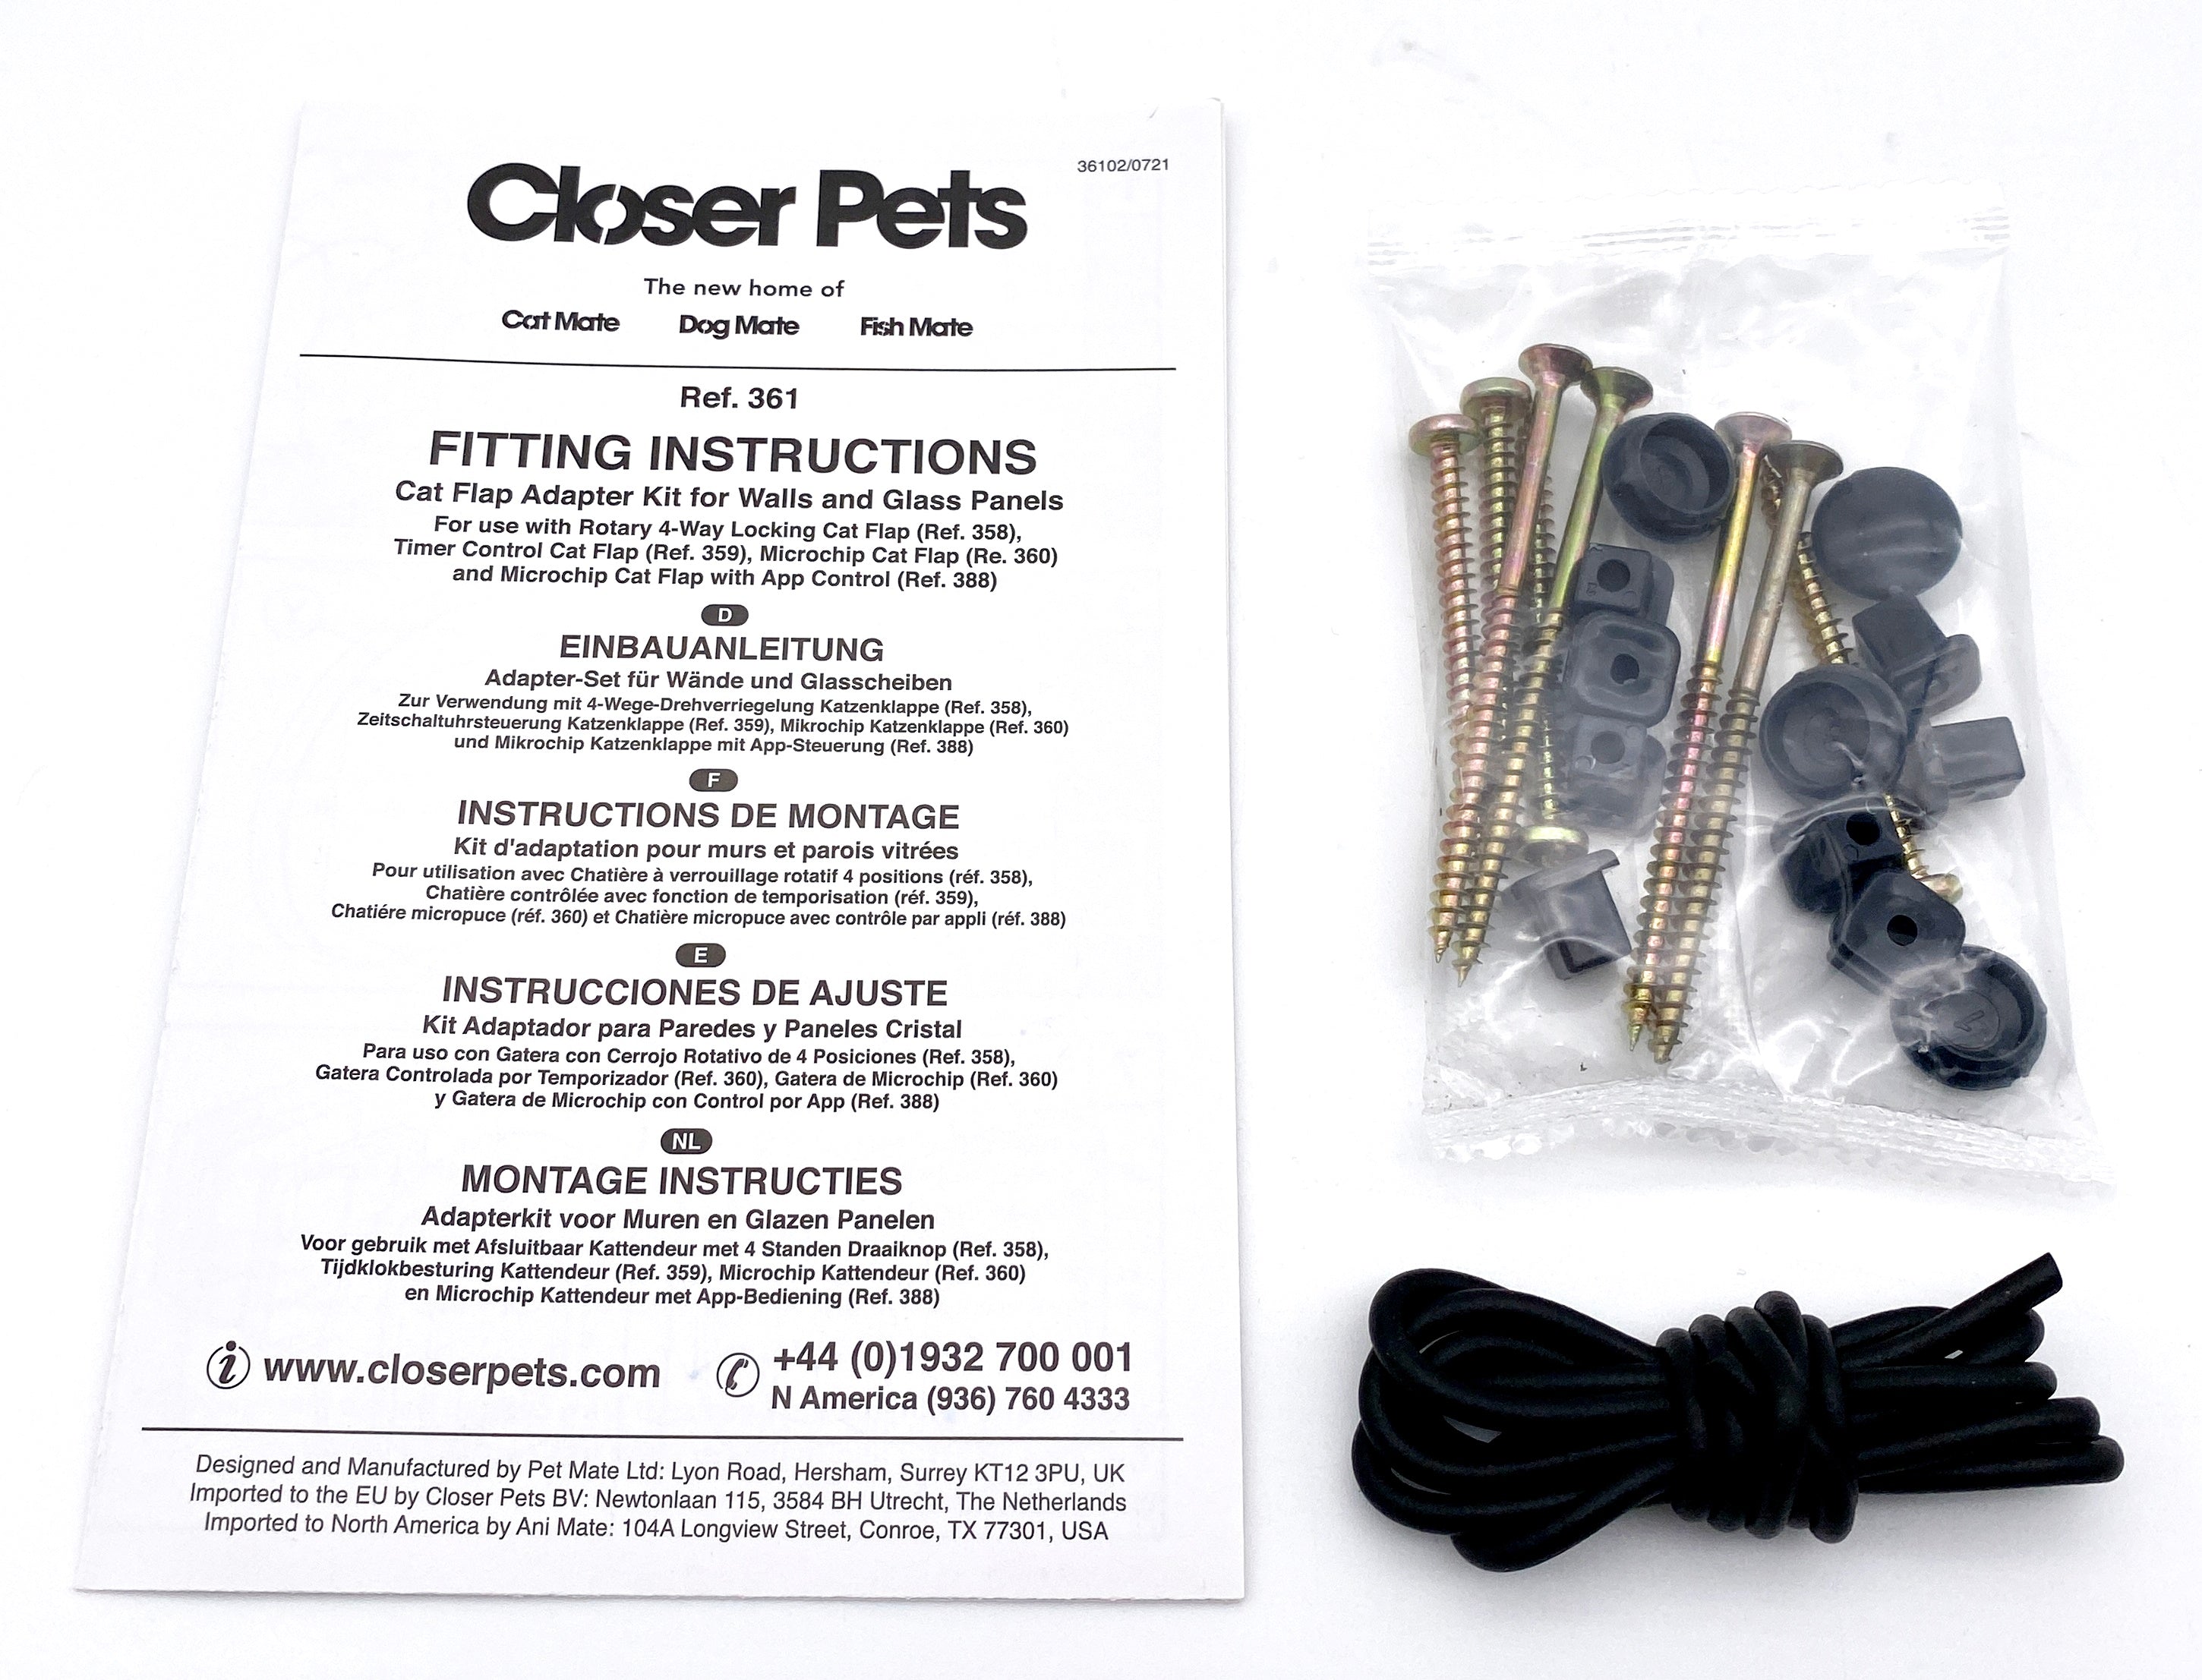 Cat Mate Cat Flap Adapter Kit for Walls and Glass Panels